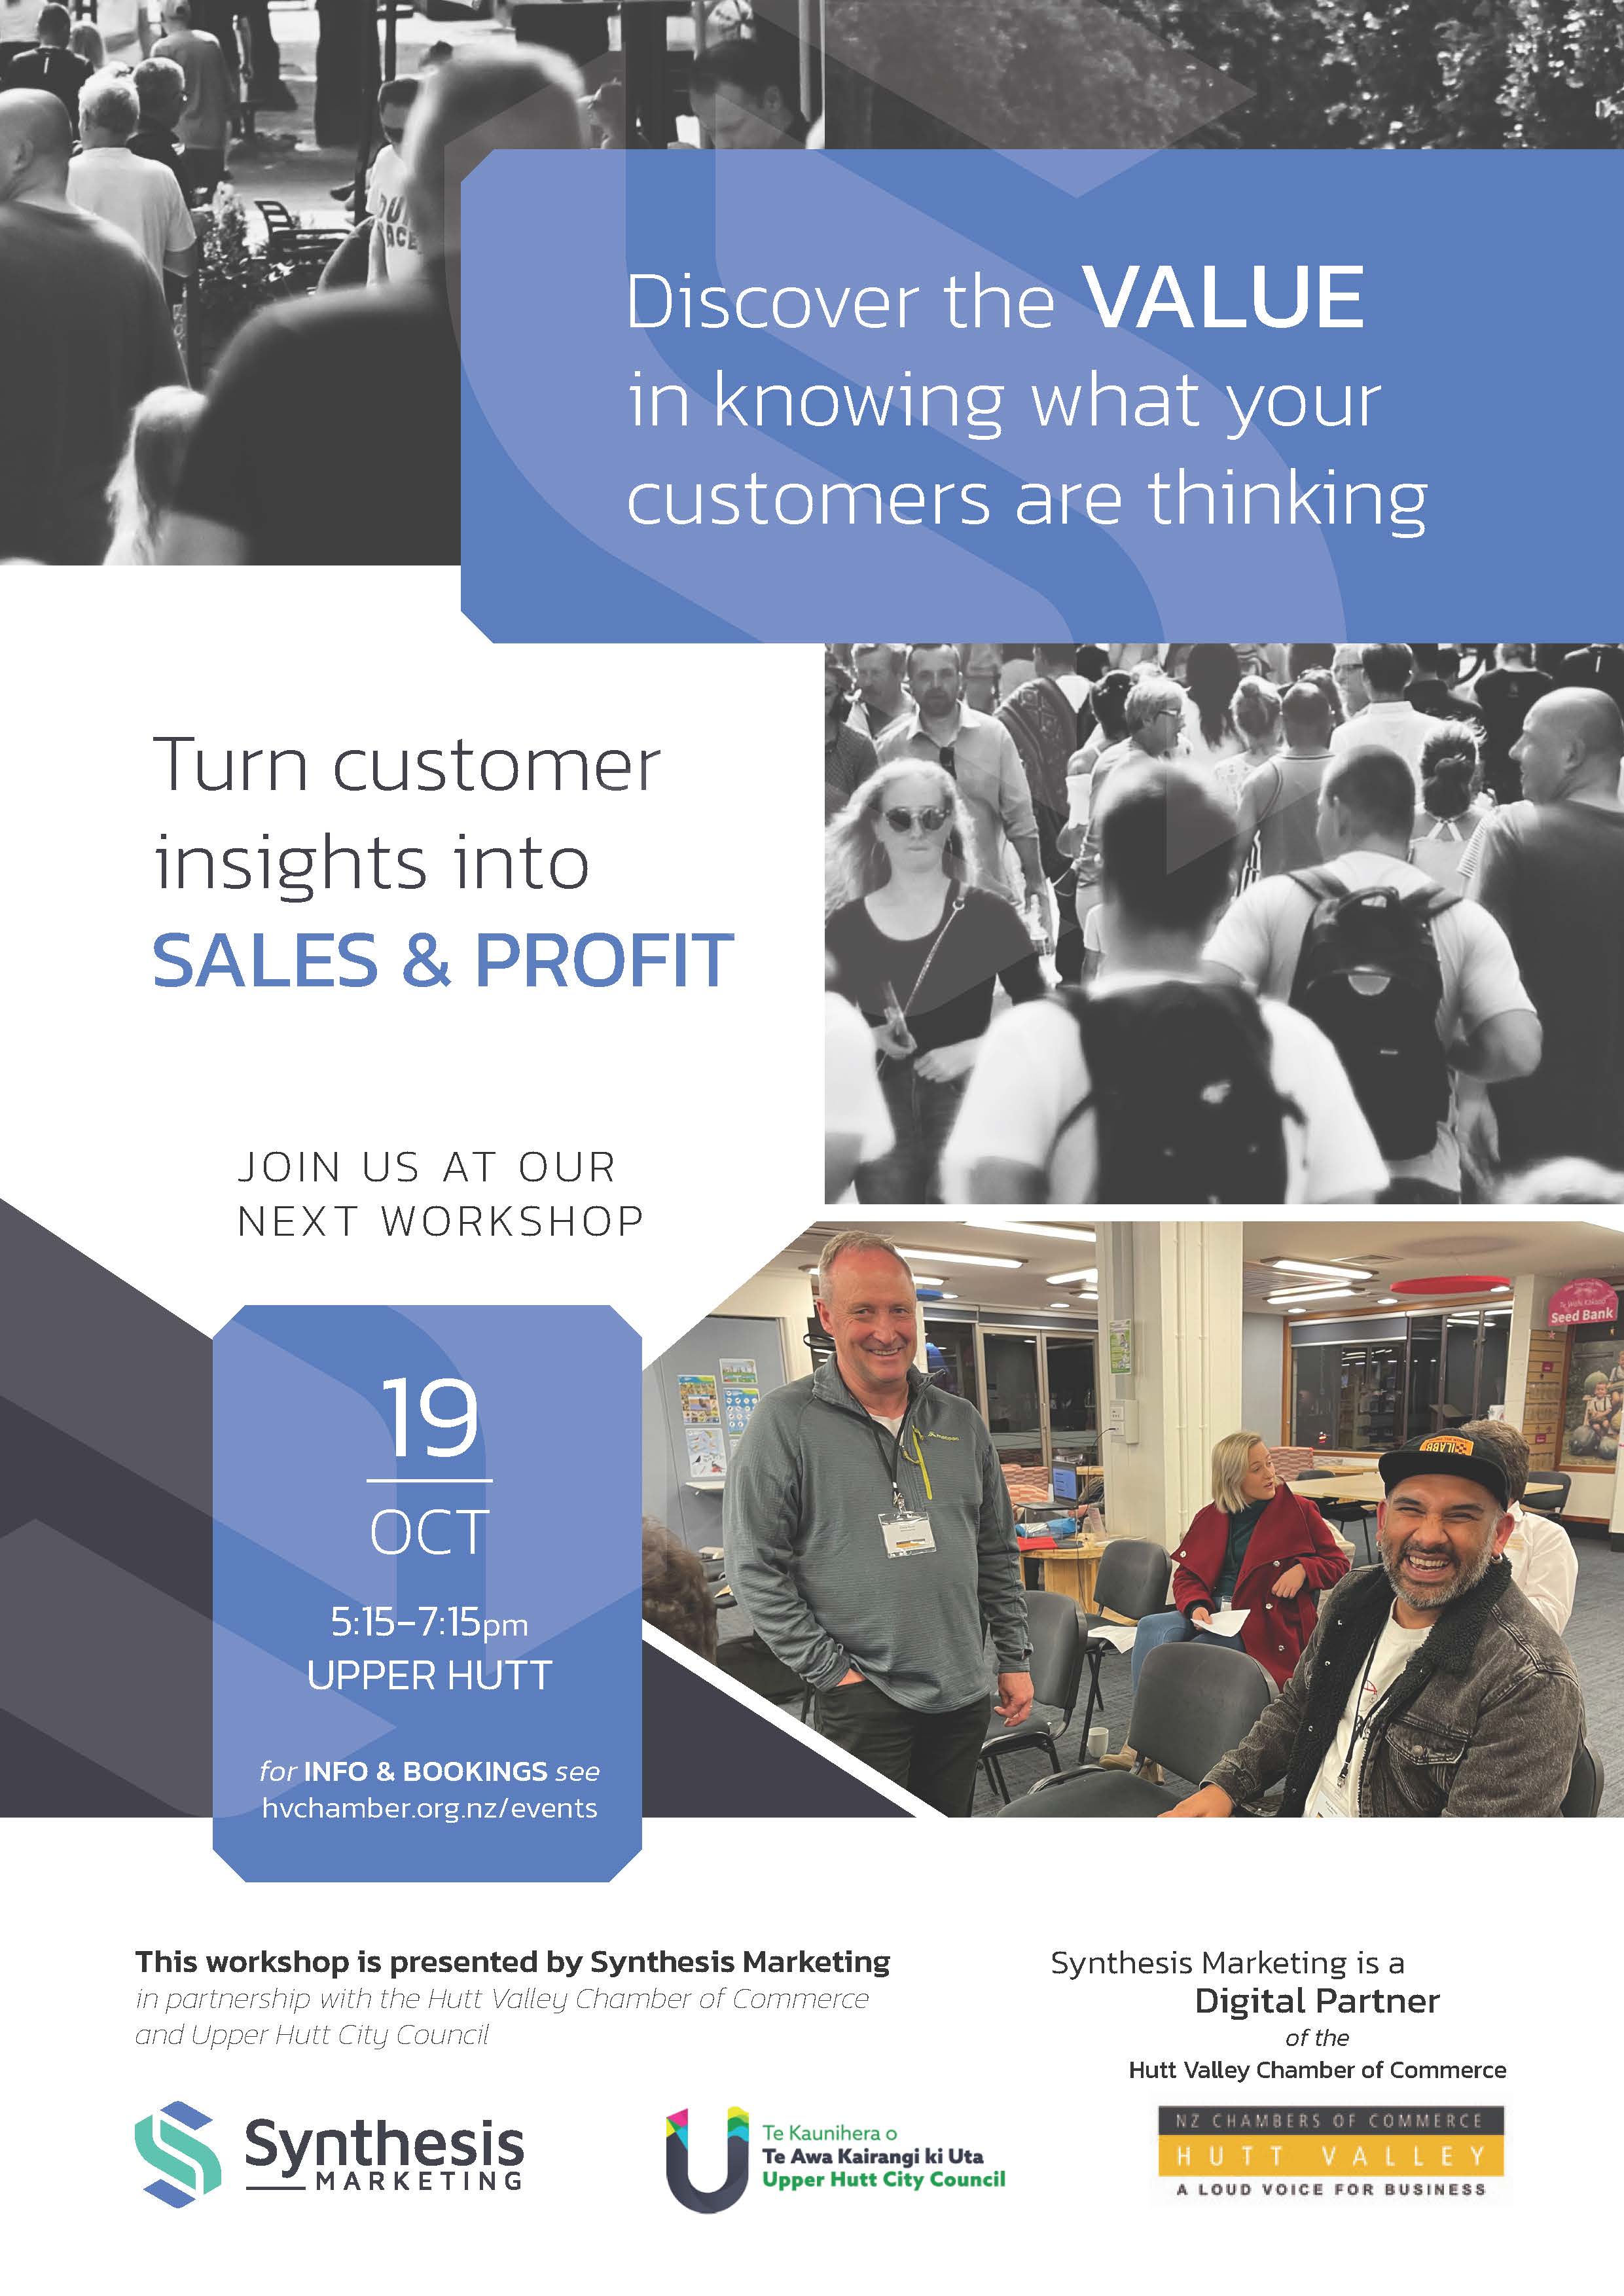 Synthesis Marketing Workshop - How To Turn Customer Insights Into Sales and Profit